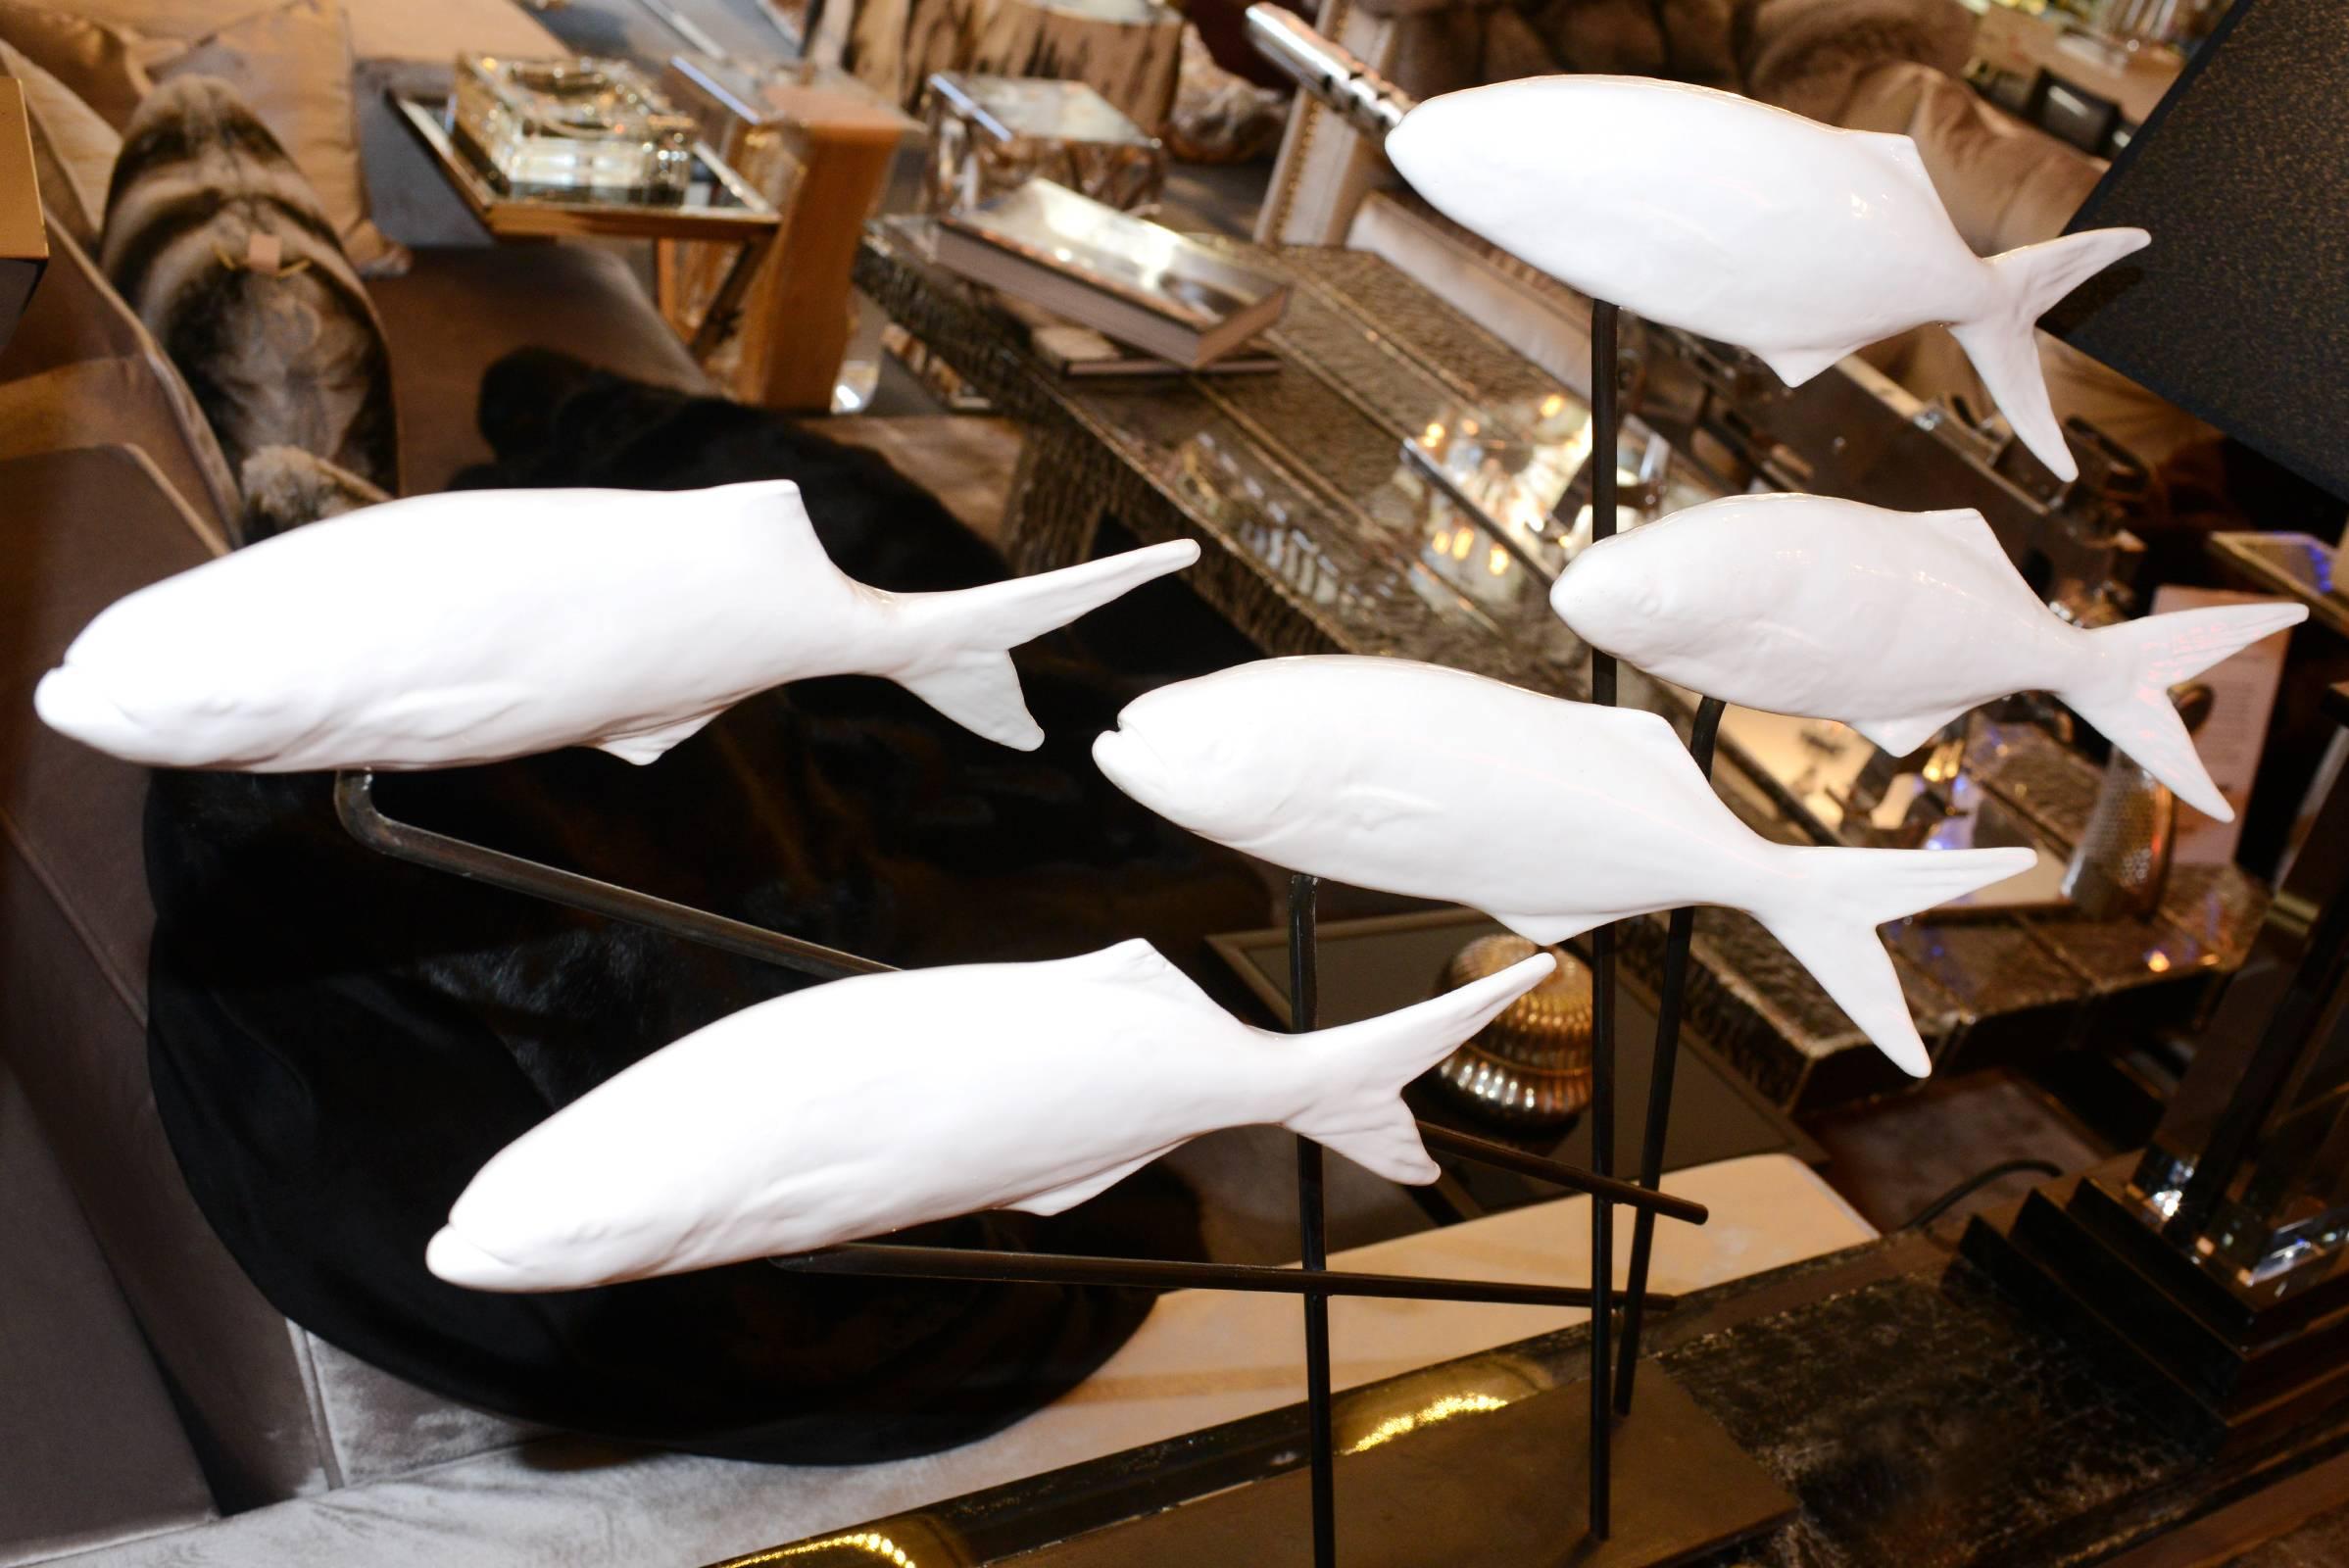 Sculpture fishes in white ceramic by french artist
Jean-CHristophe Dablemont. On black bronze base.
Base: 50 x 10cm.
